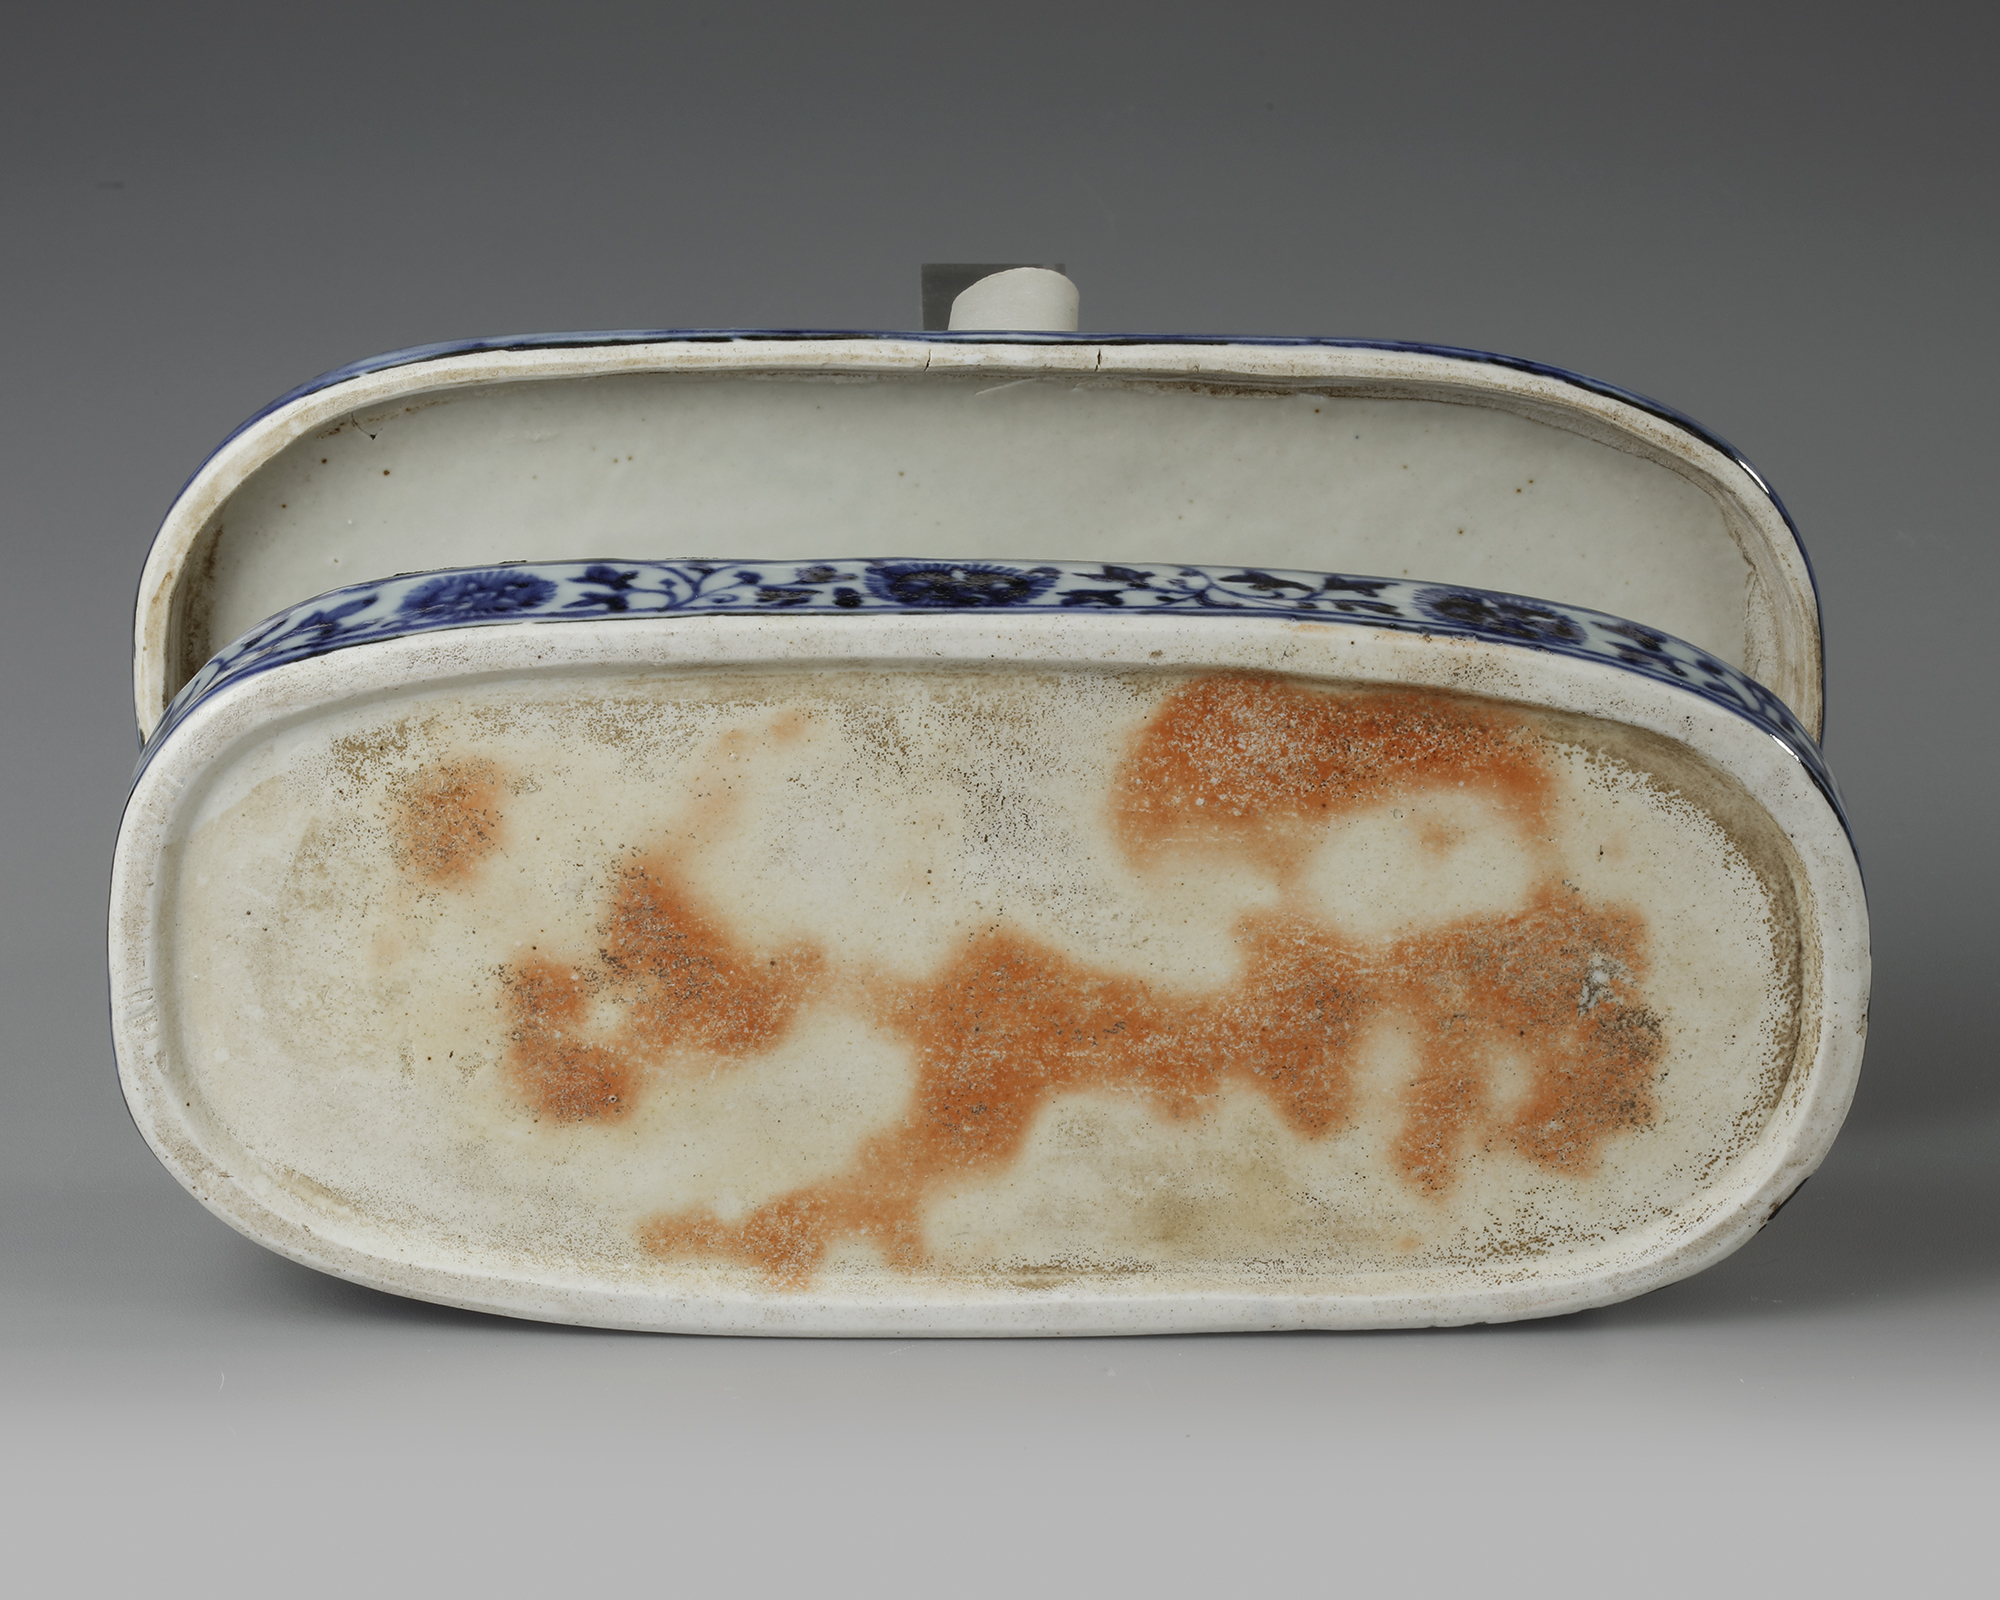 A CHINESE BLUE AND WHITE PEN BOX FOR THE ISLAMIC MARKET, QING DYNASTY (1644-1911) - Image 5 of 5